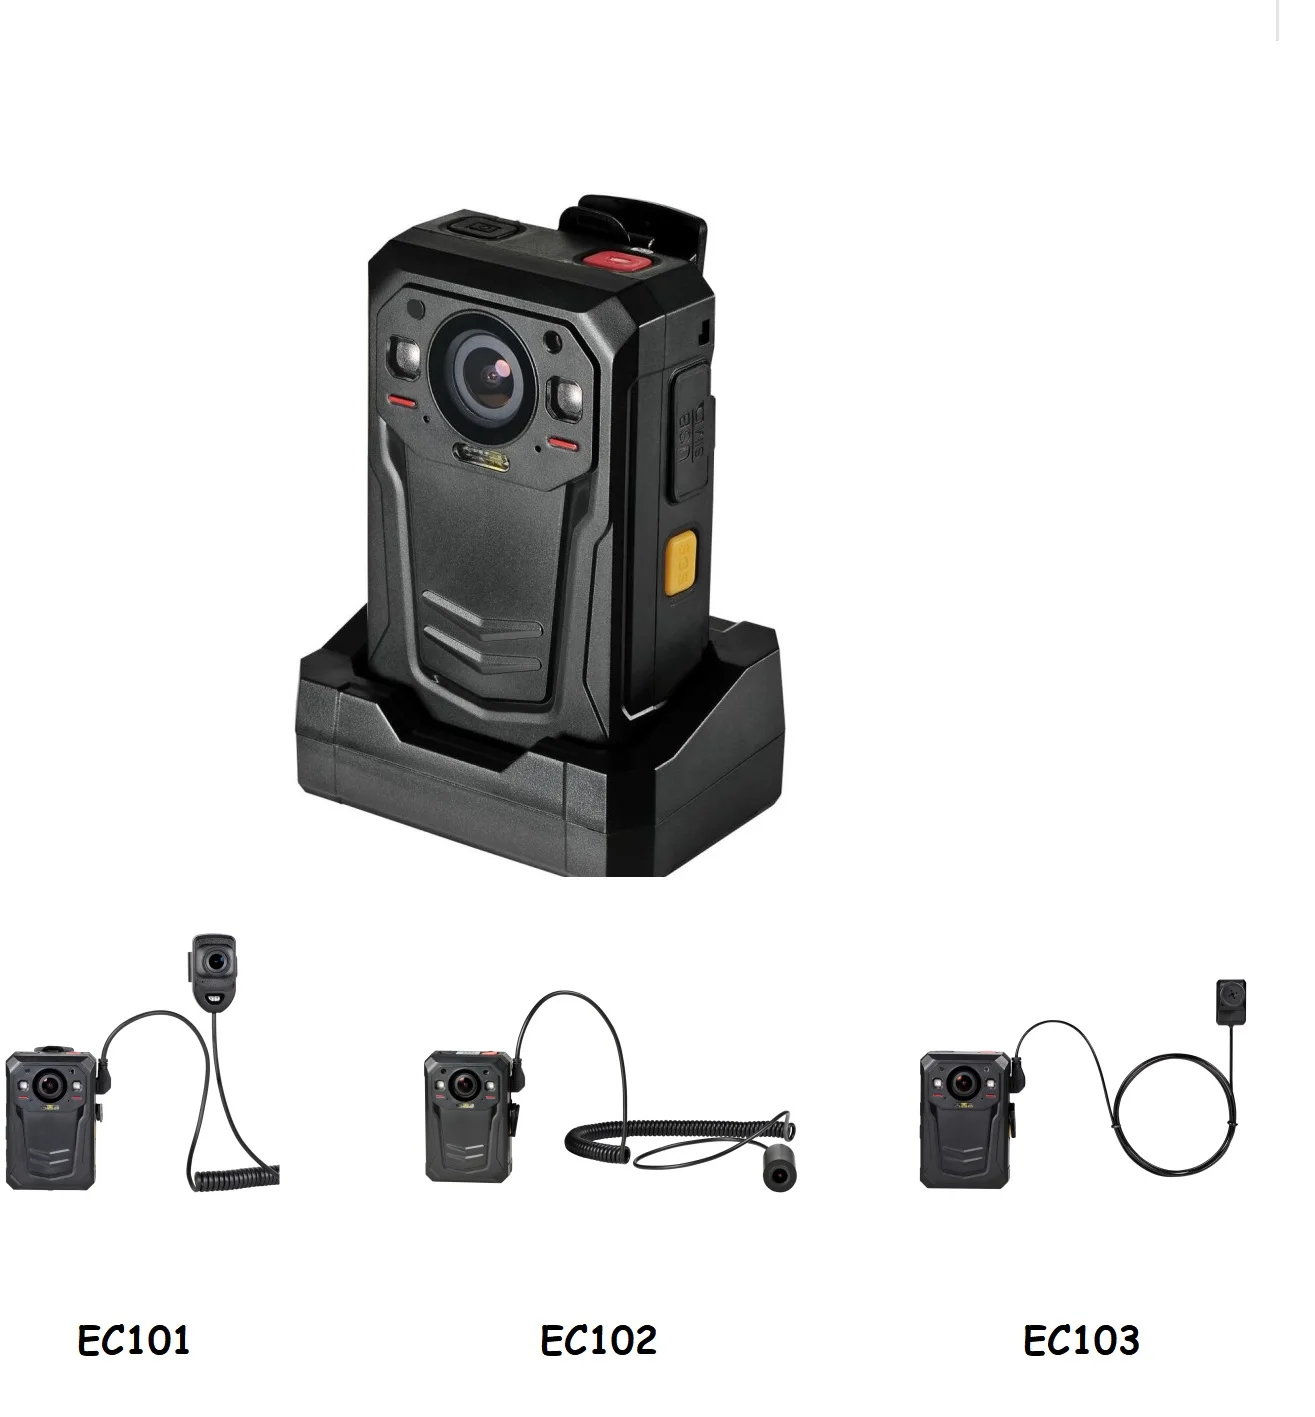 Intrekking eeuwig Speels Ambarella A12 S5l Body Camera With Linux System Support Support For Cluster  Intercom Body Worn Camera - Buy Body Worn Camera,Body Camera,Law  Enforcement Body Cameras Product on Alibaba.com